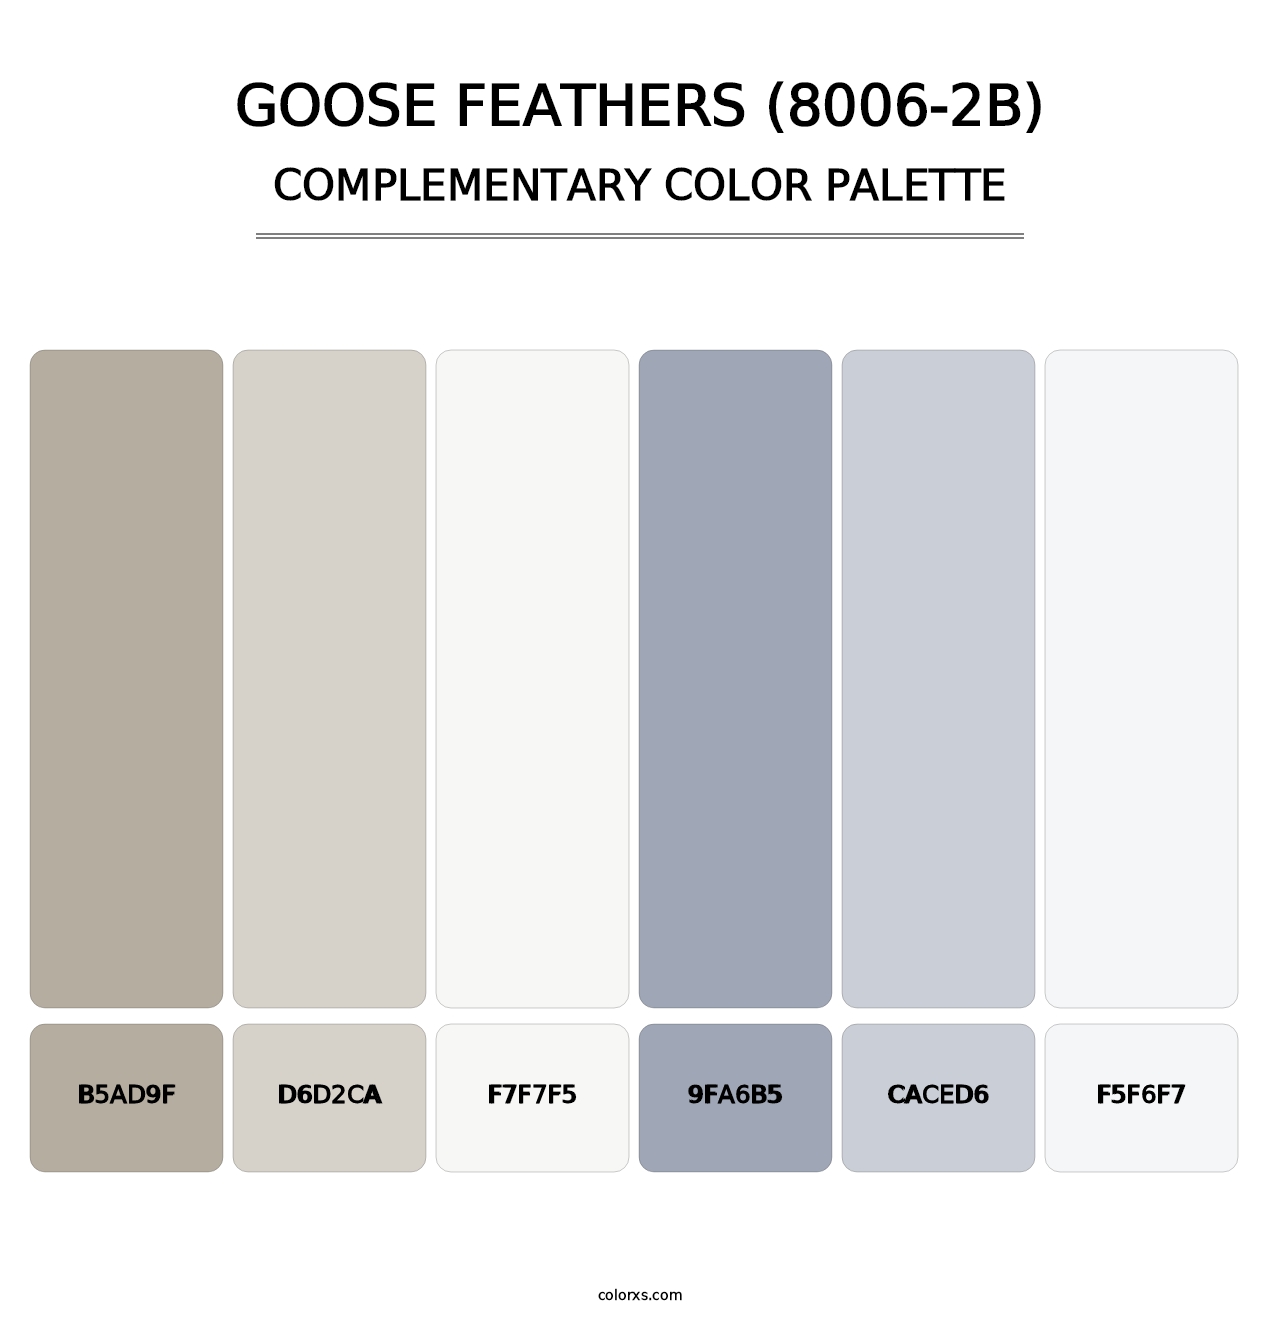 Goose Feathers (8006-2B) - Complementary Color Palette